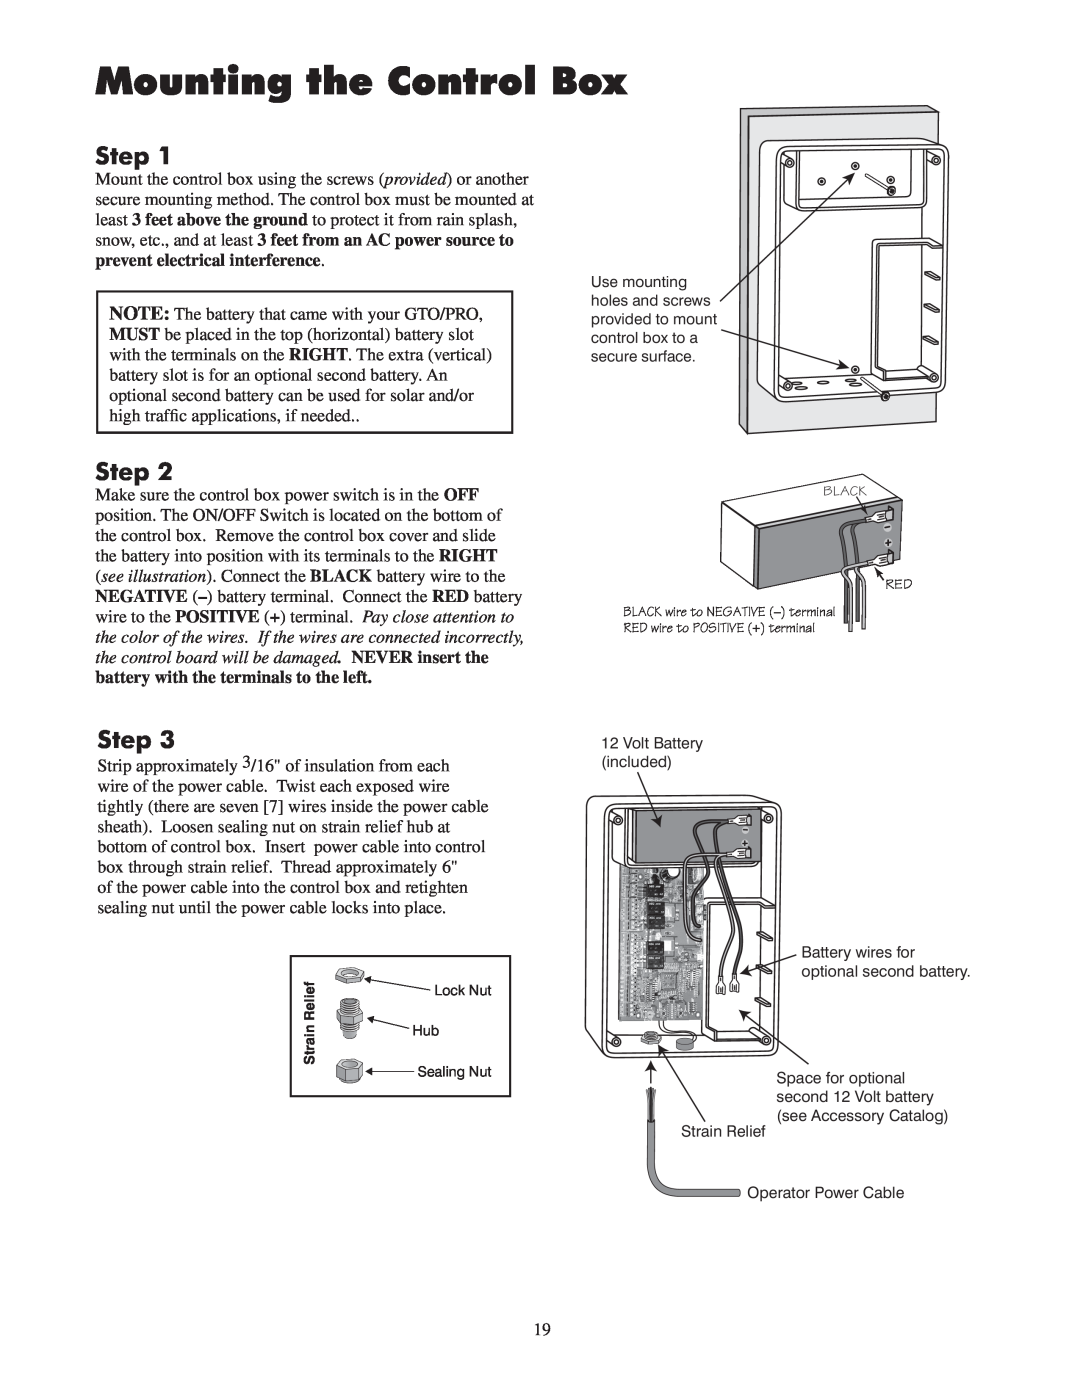 GTO 2502, 2550 installation manual Mounting the Control Box, Step 